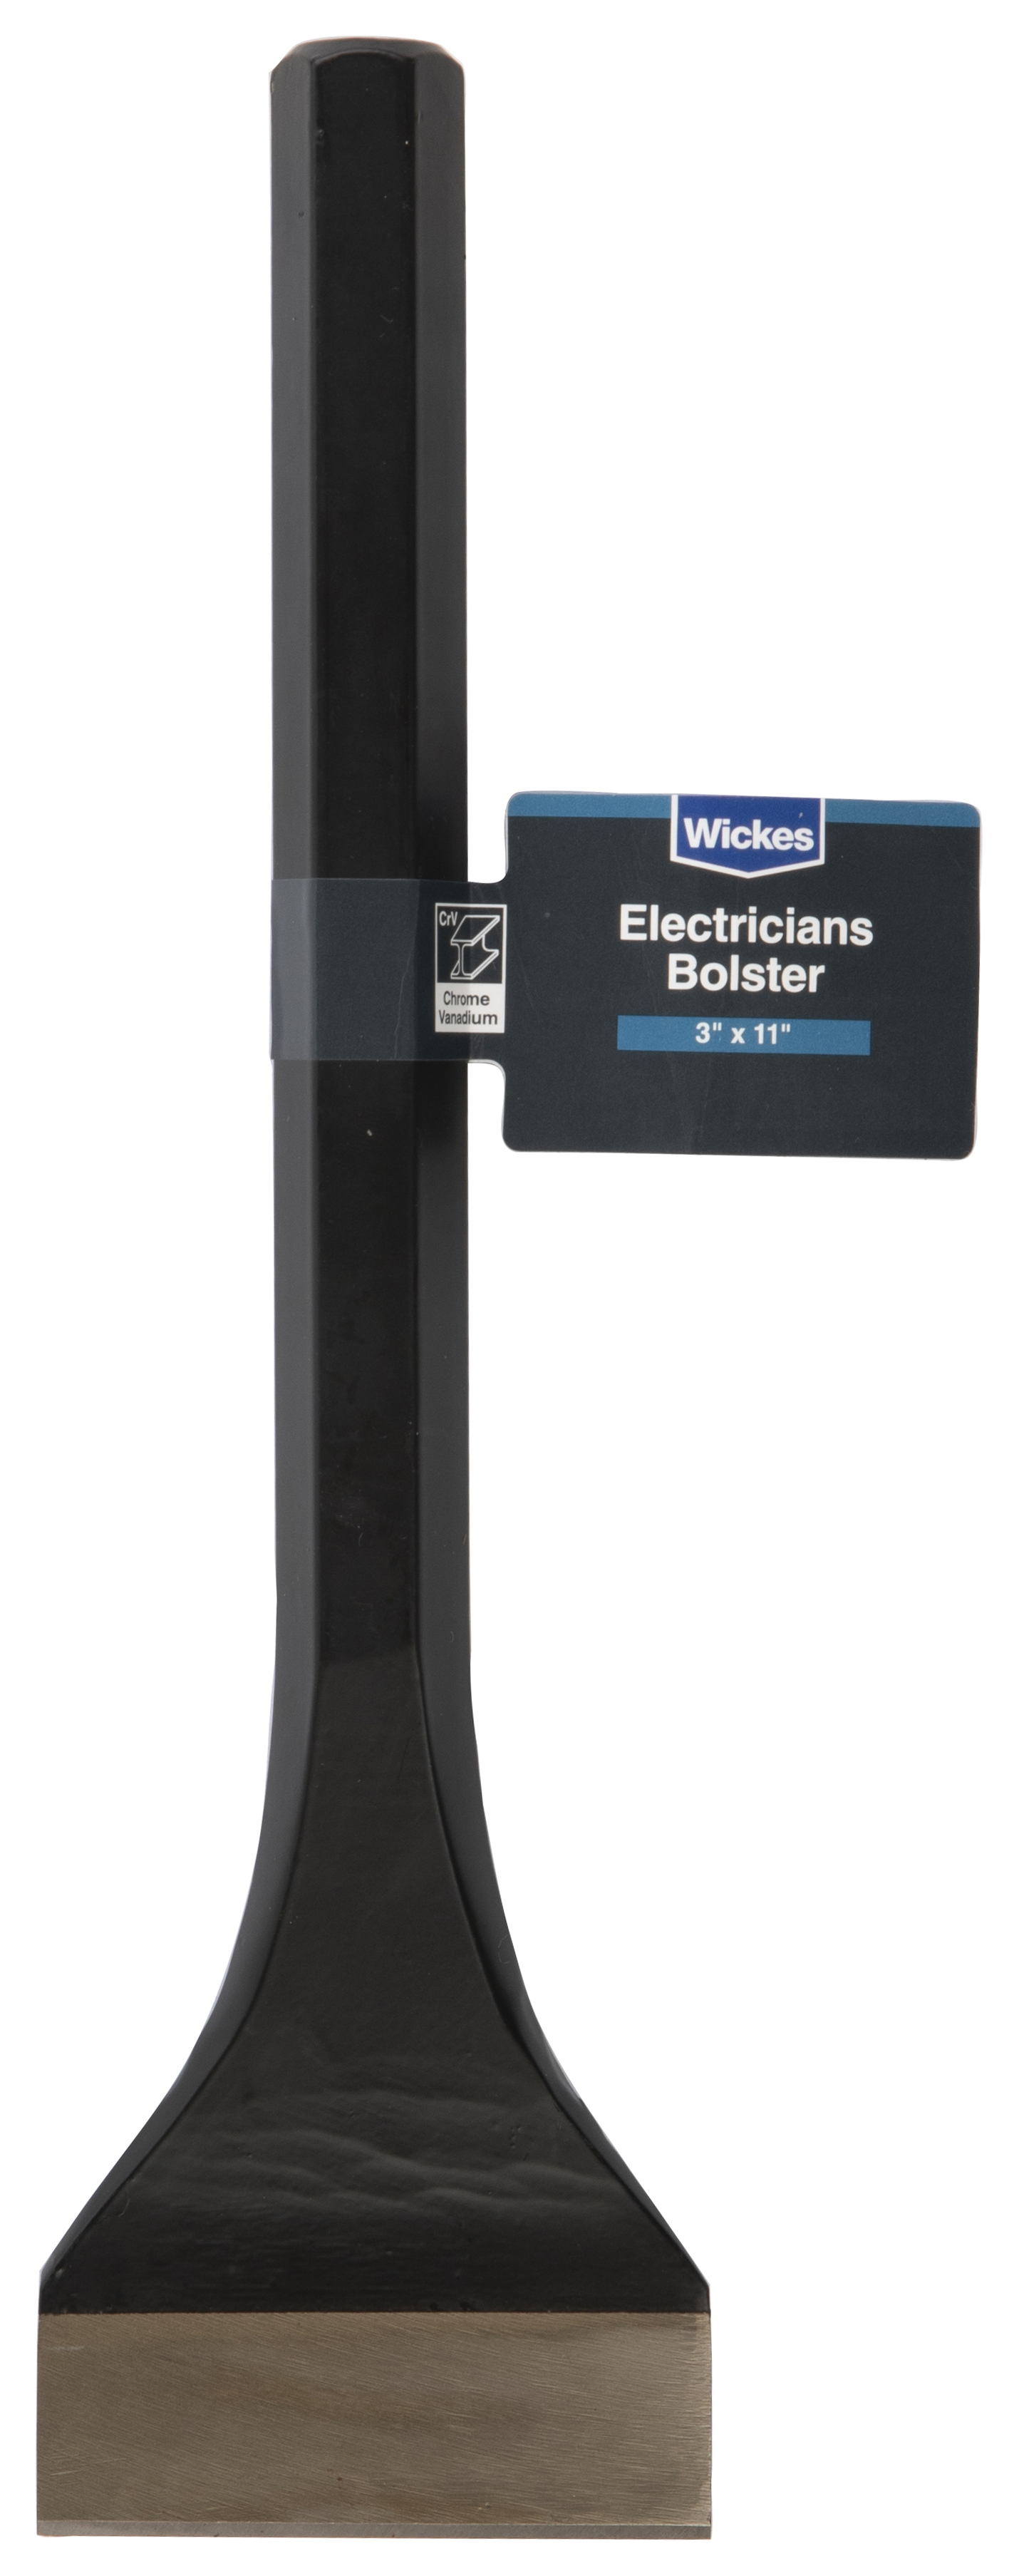 Wickes Electricians Bolster 3" x 11"